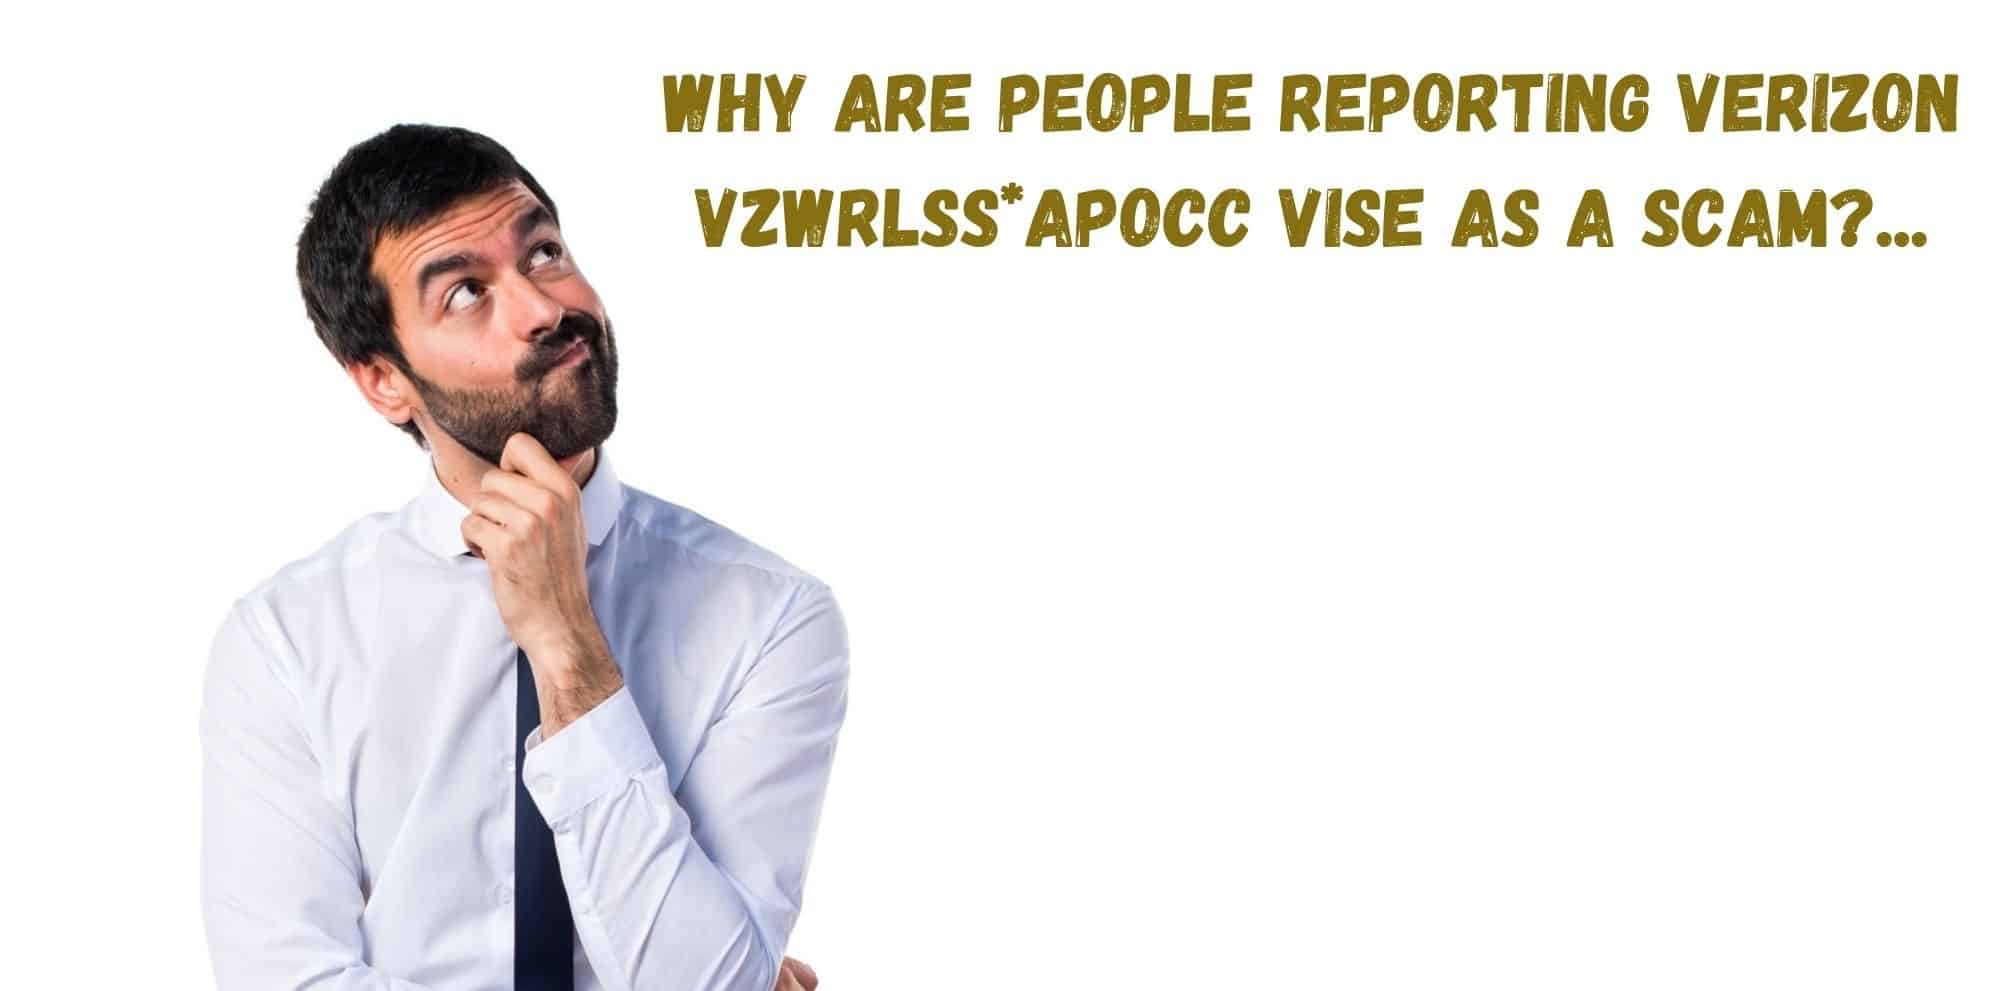 Why are People Reporting Verizon VZWRLSS*APOCC Vise as a Scam